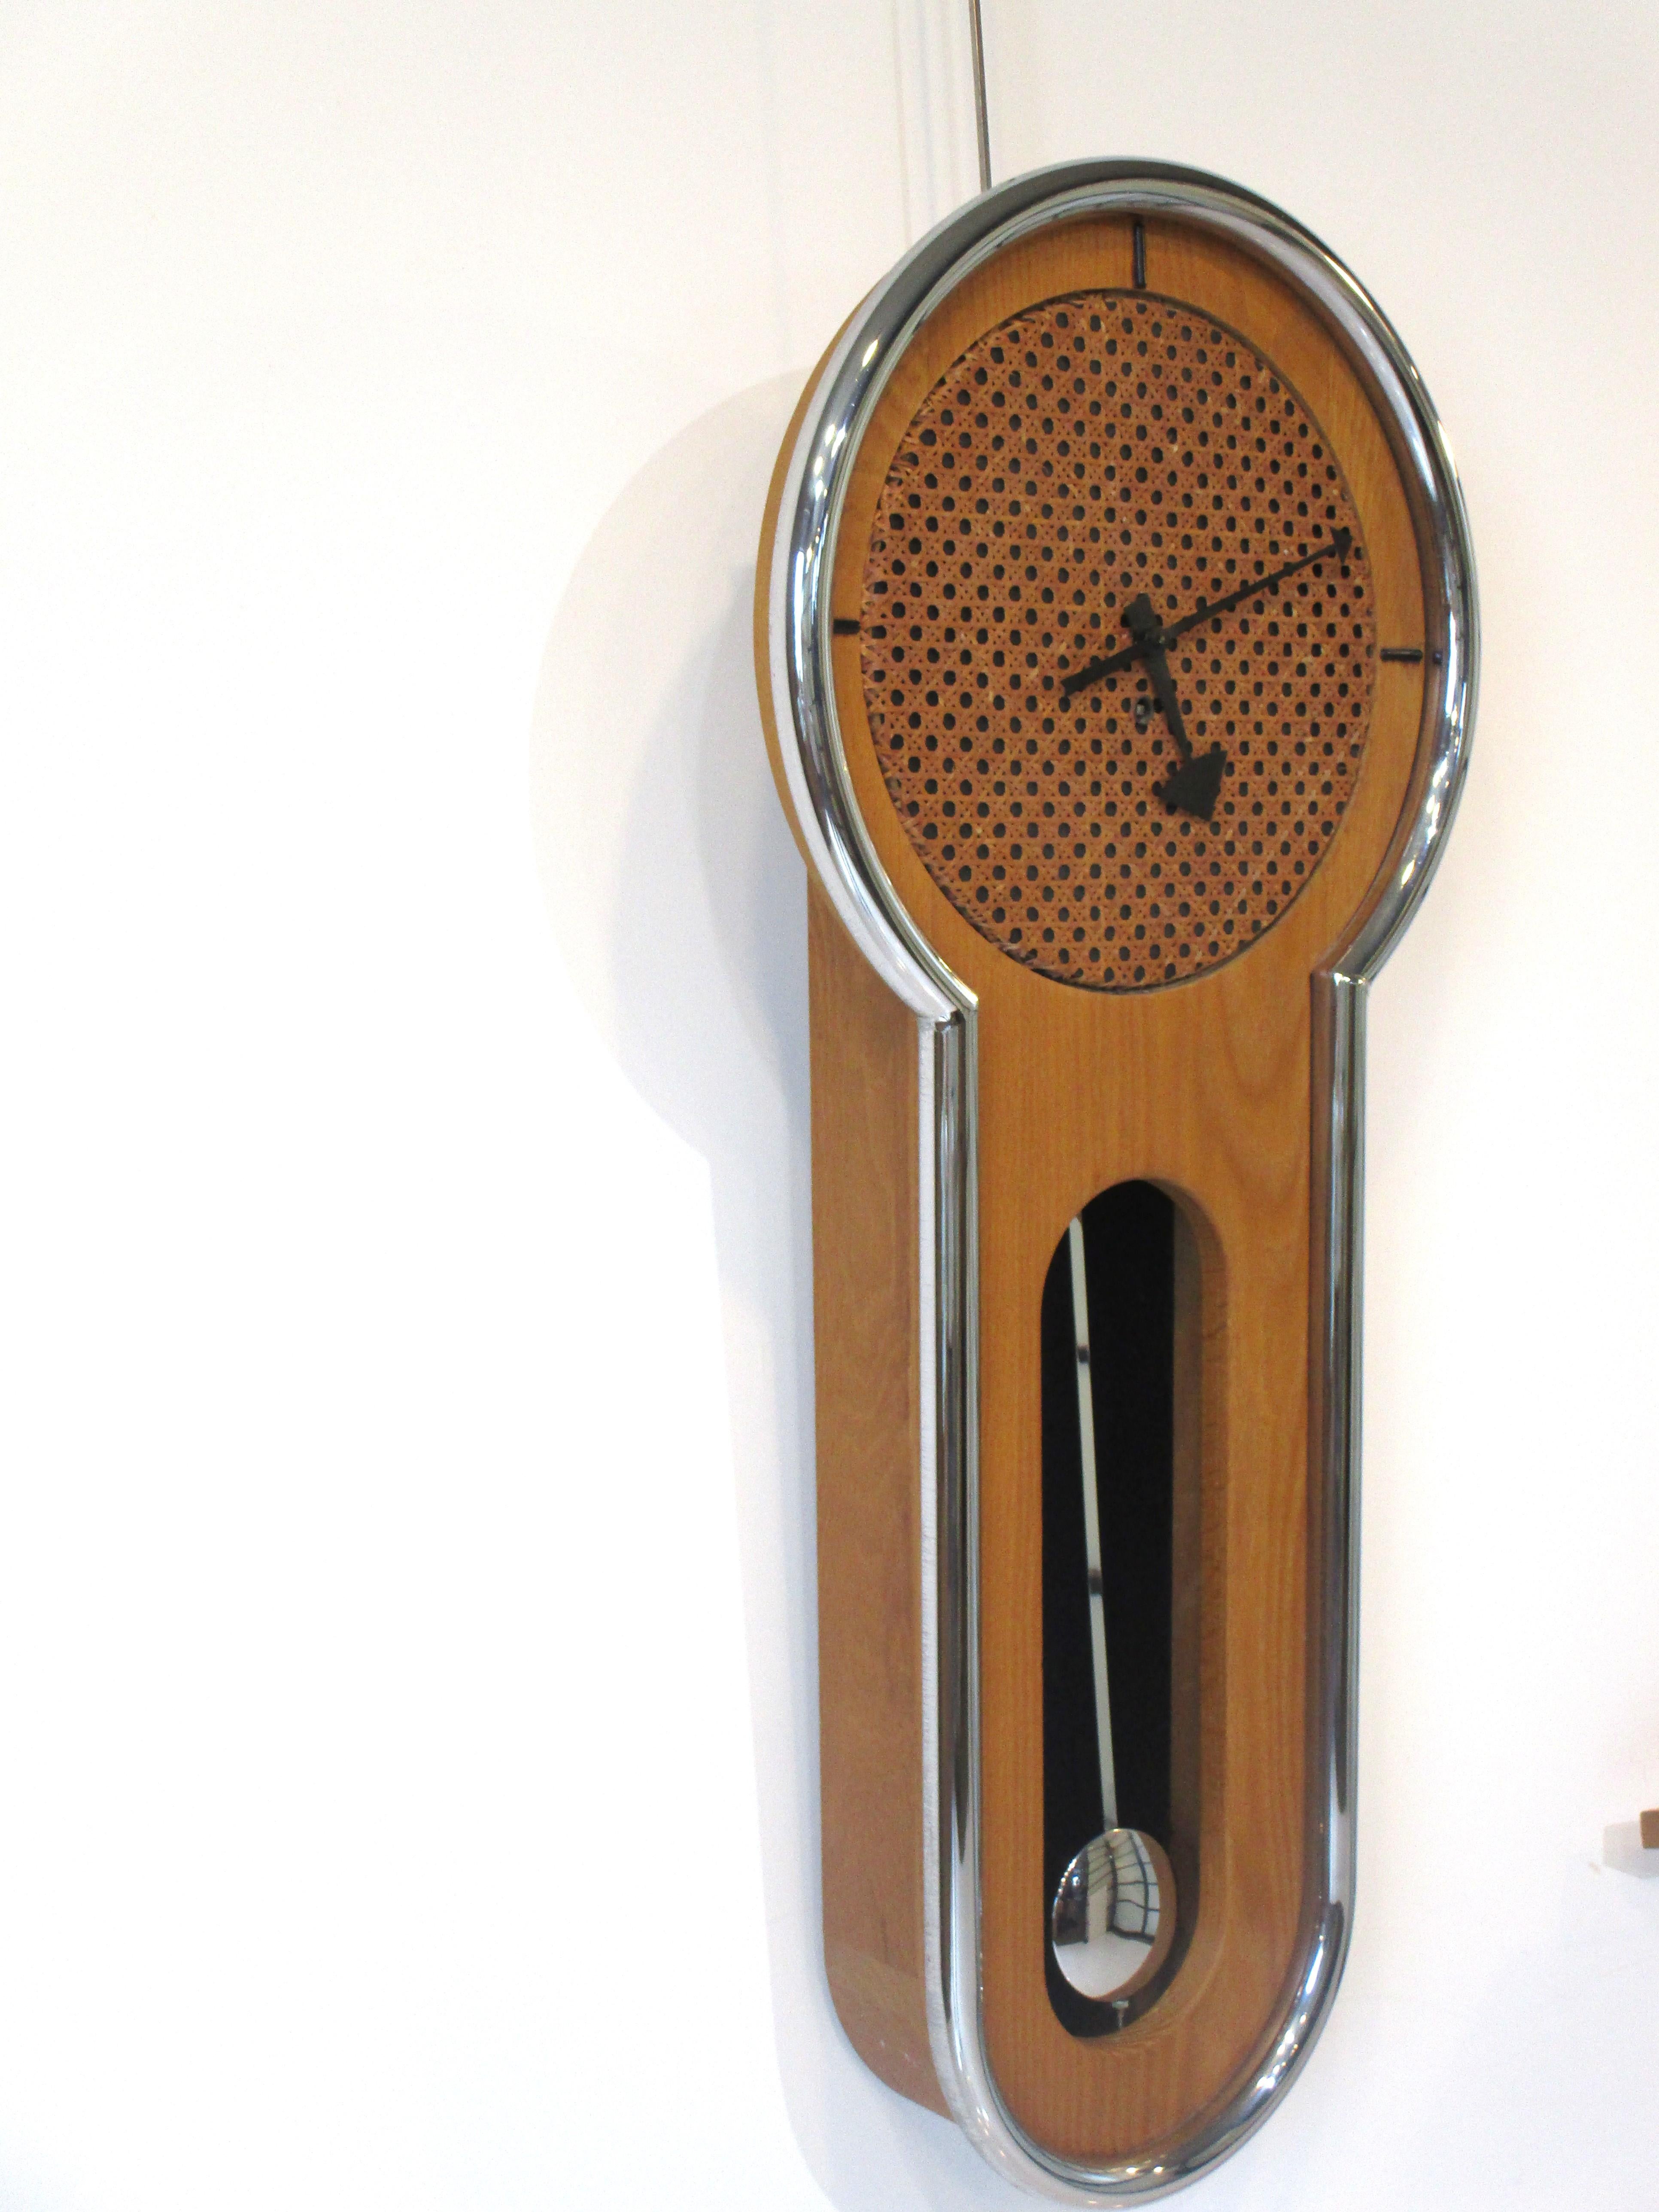 Mid-Century Modern Howard Miller Wall Clock # 614 George Nelson Styled